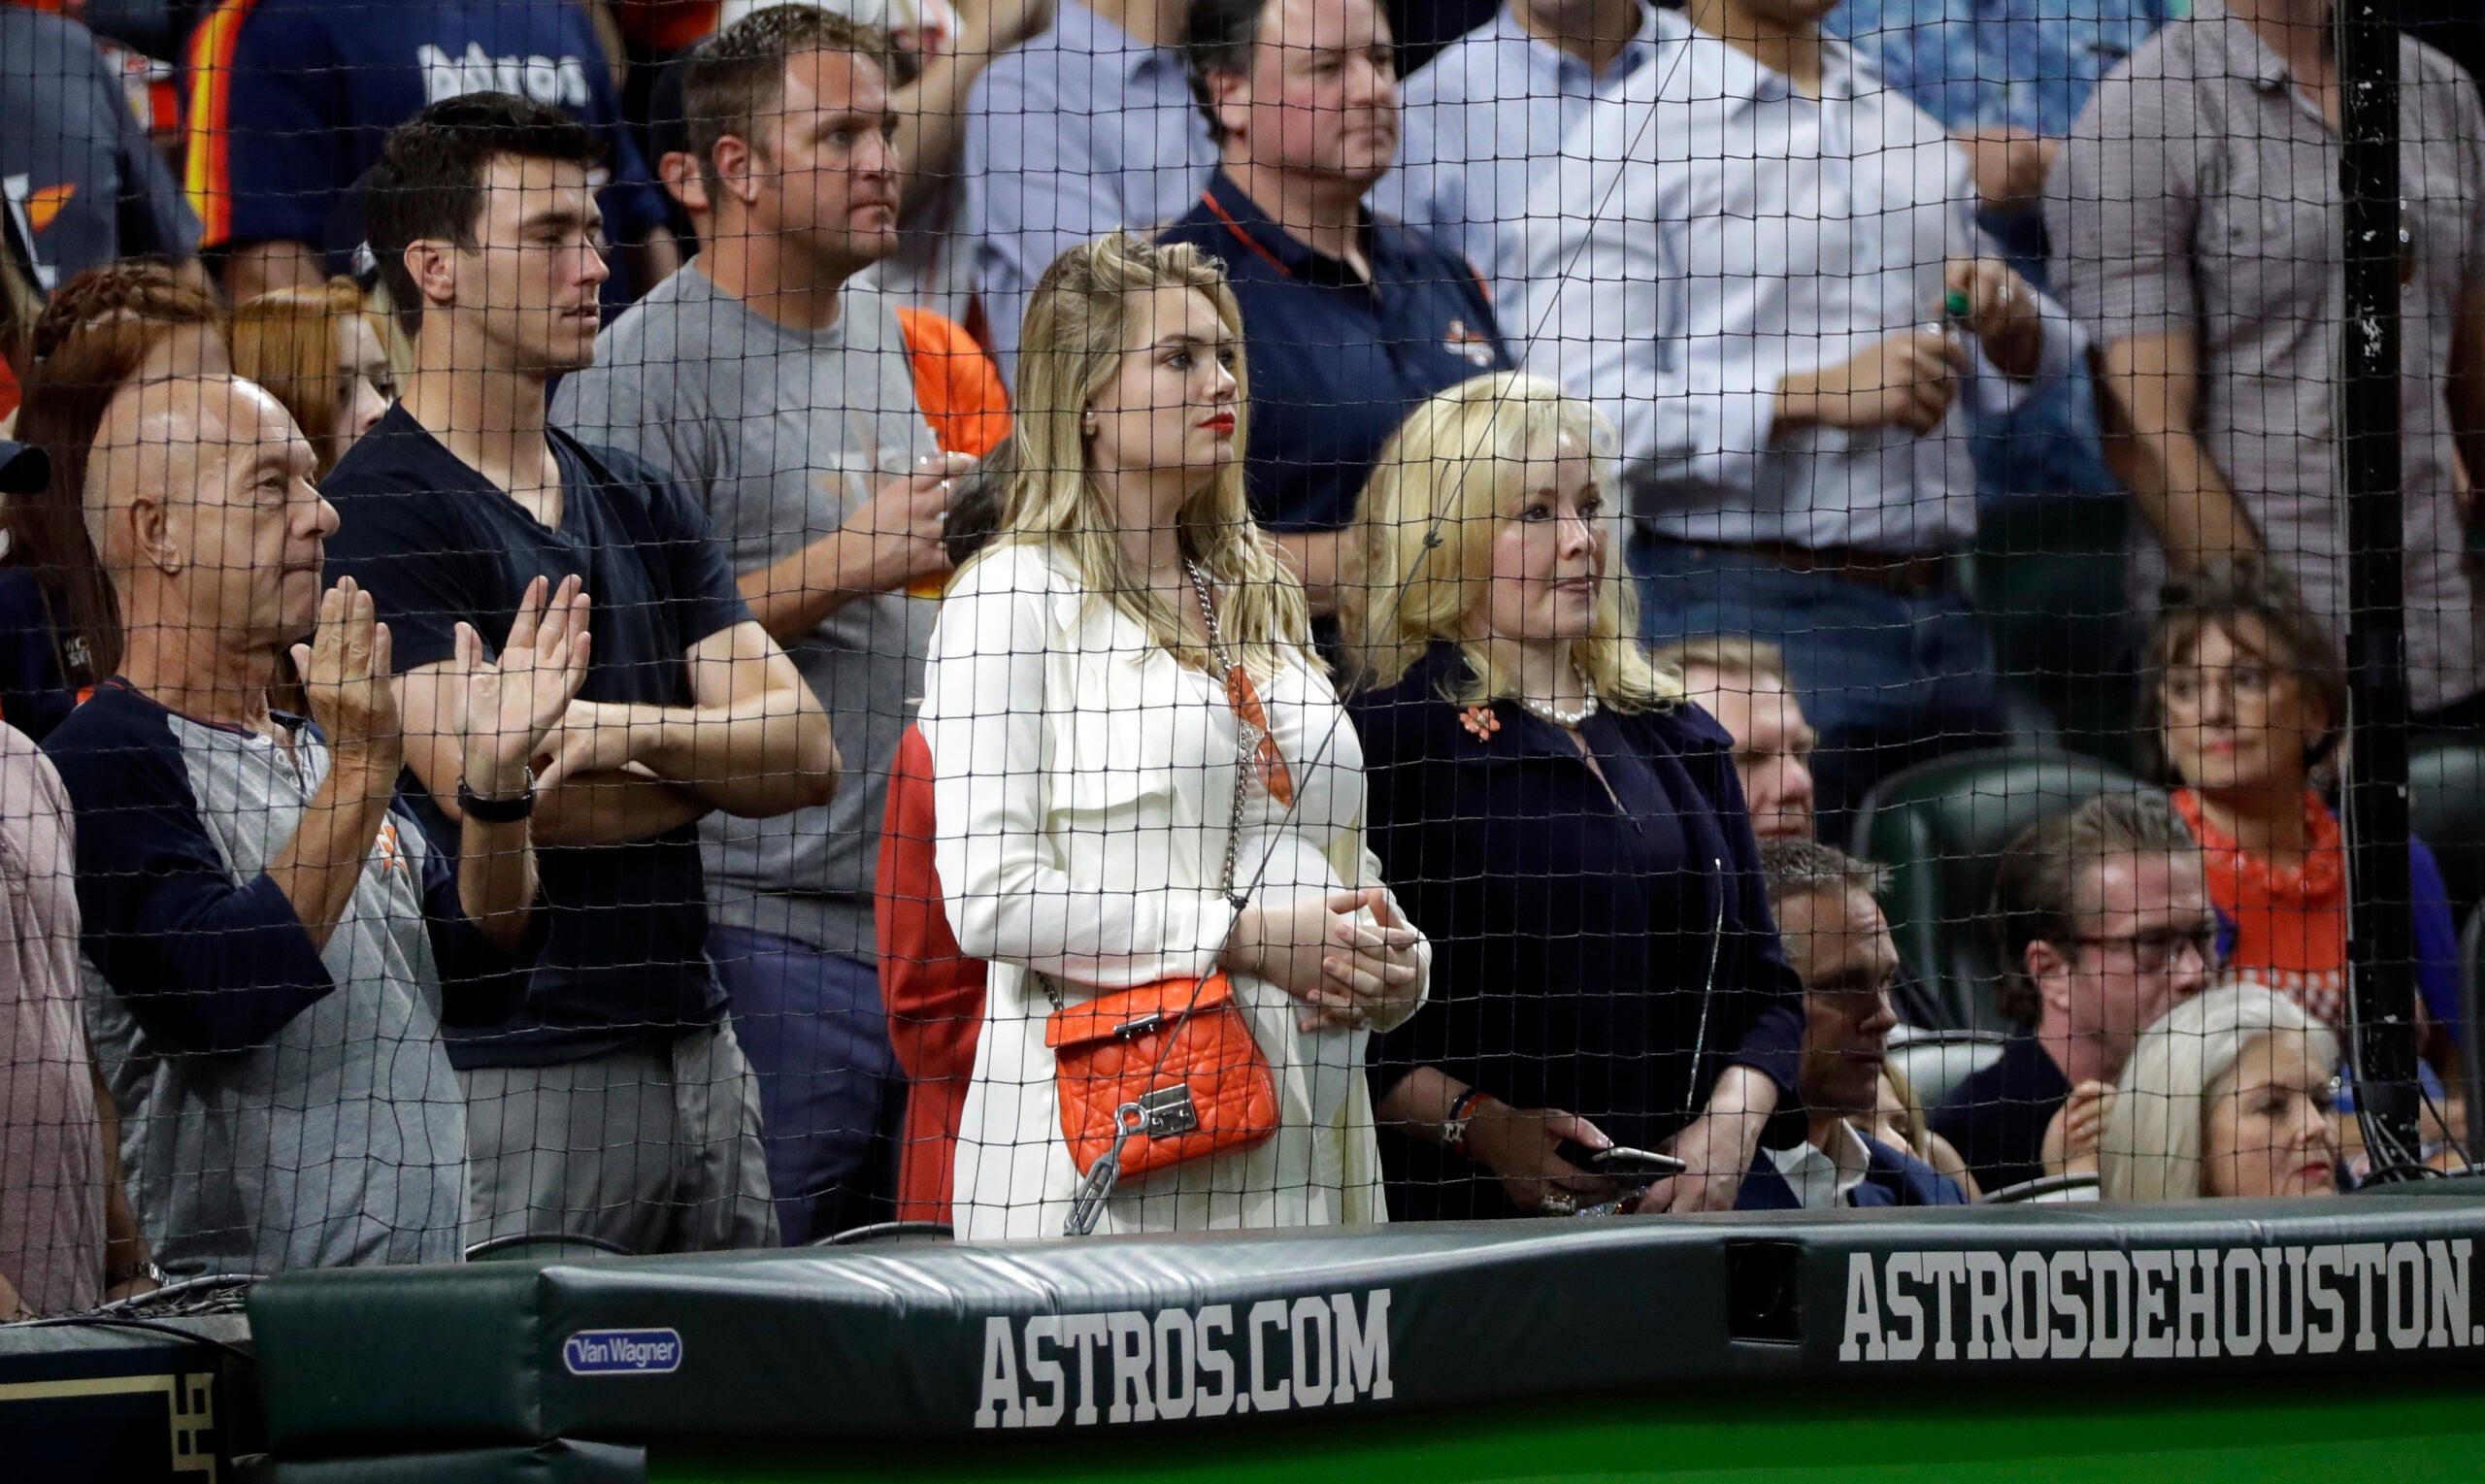 Kate Upton was not happy with Joe West's controversial call in